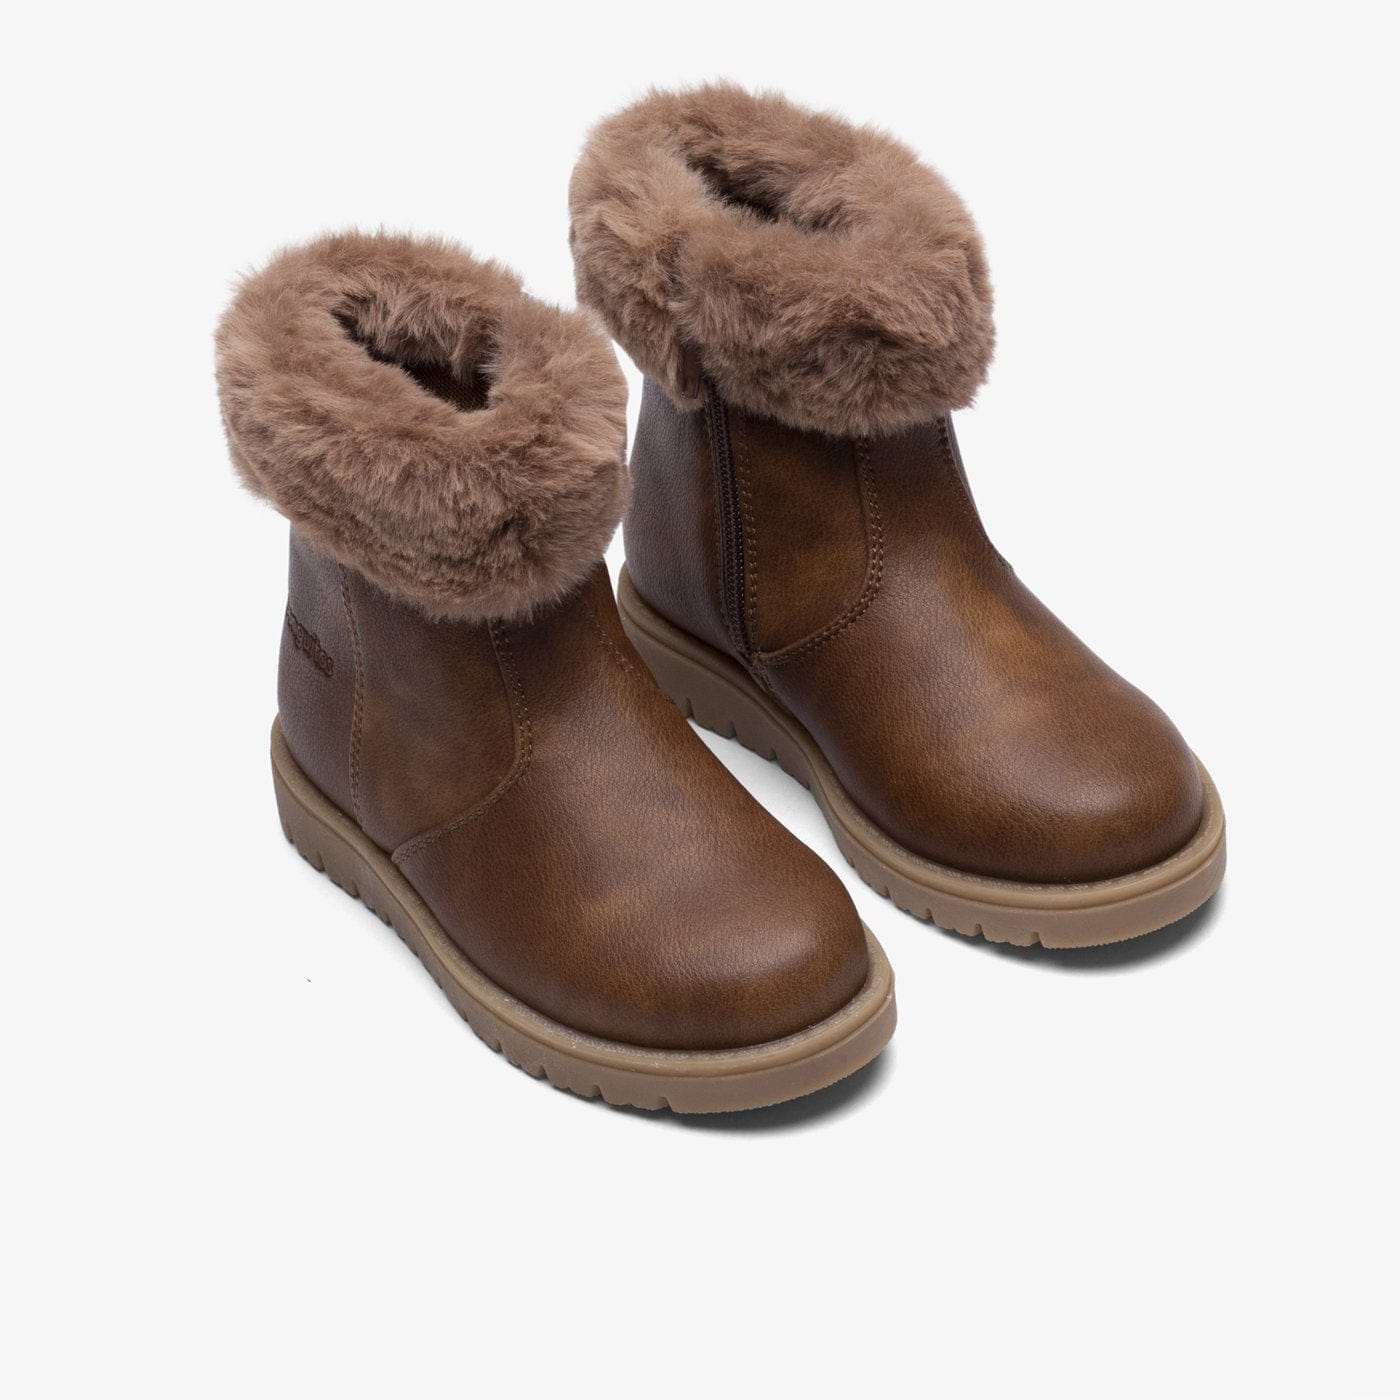 CONGUITOS Shoes Girl's Brown Fur Boots